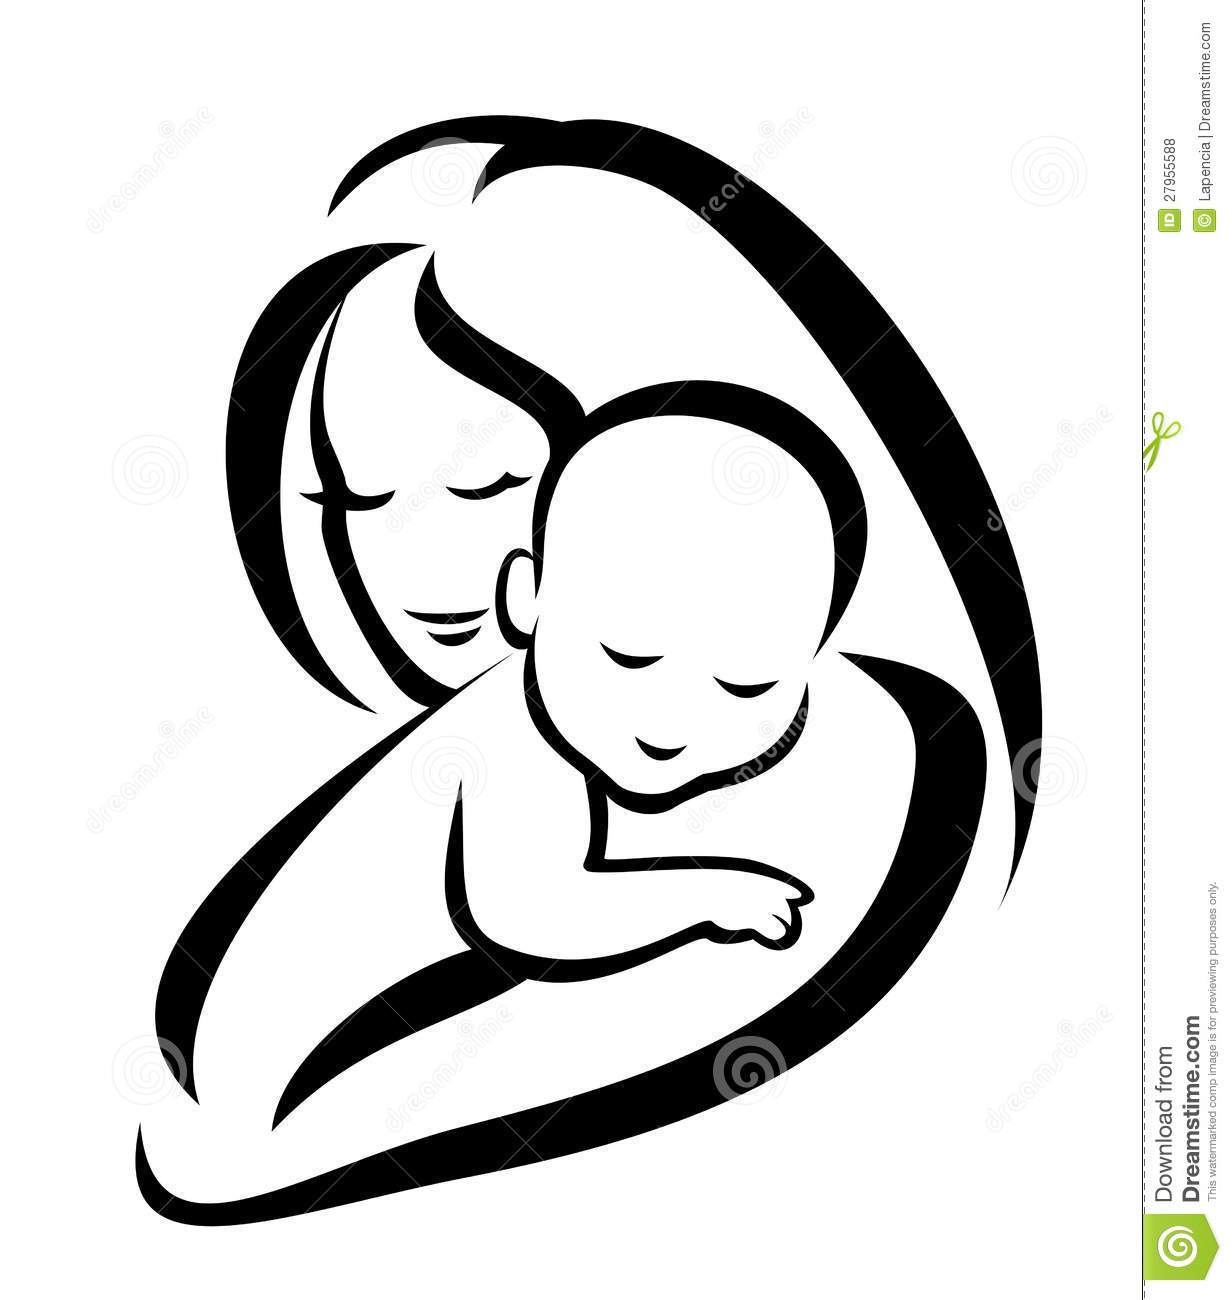 Free clipart mother and child 3 » Clipart Portal.